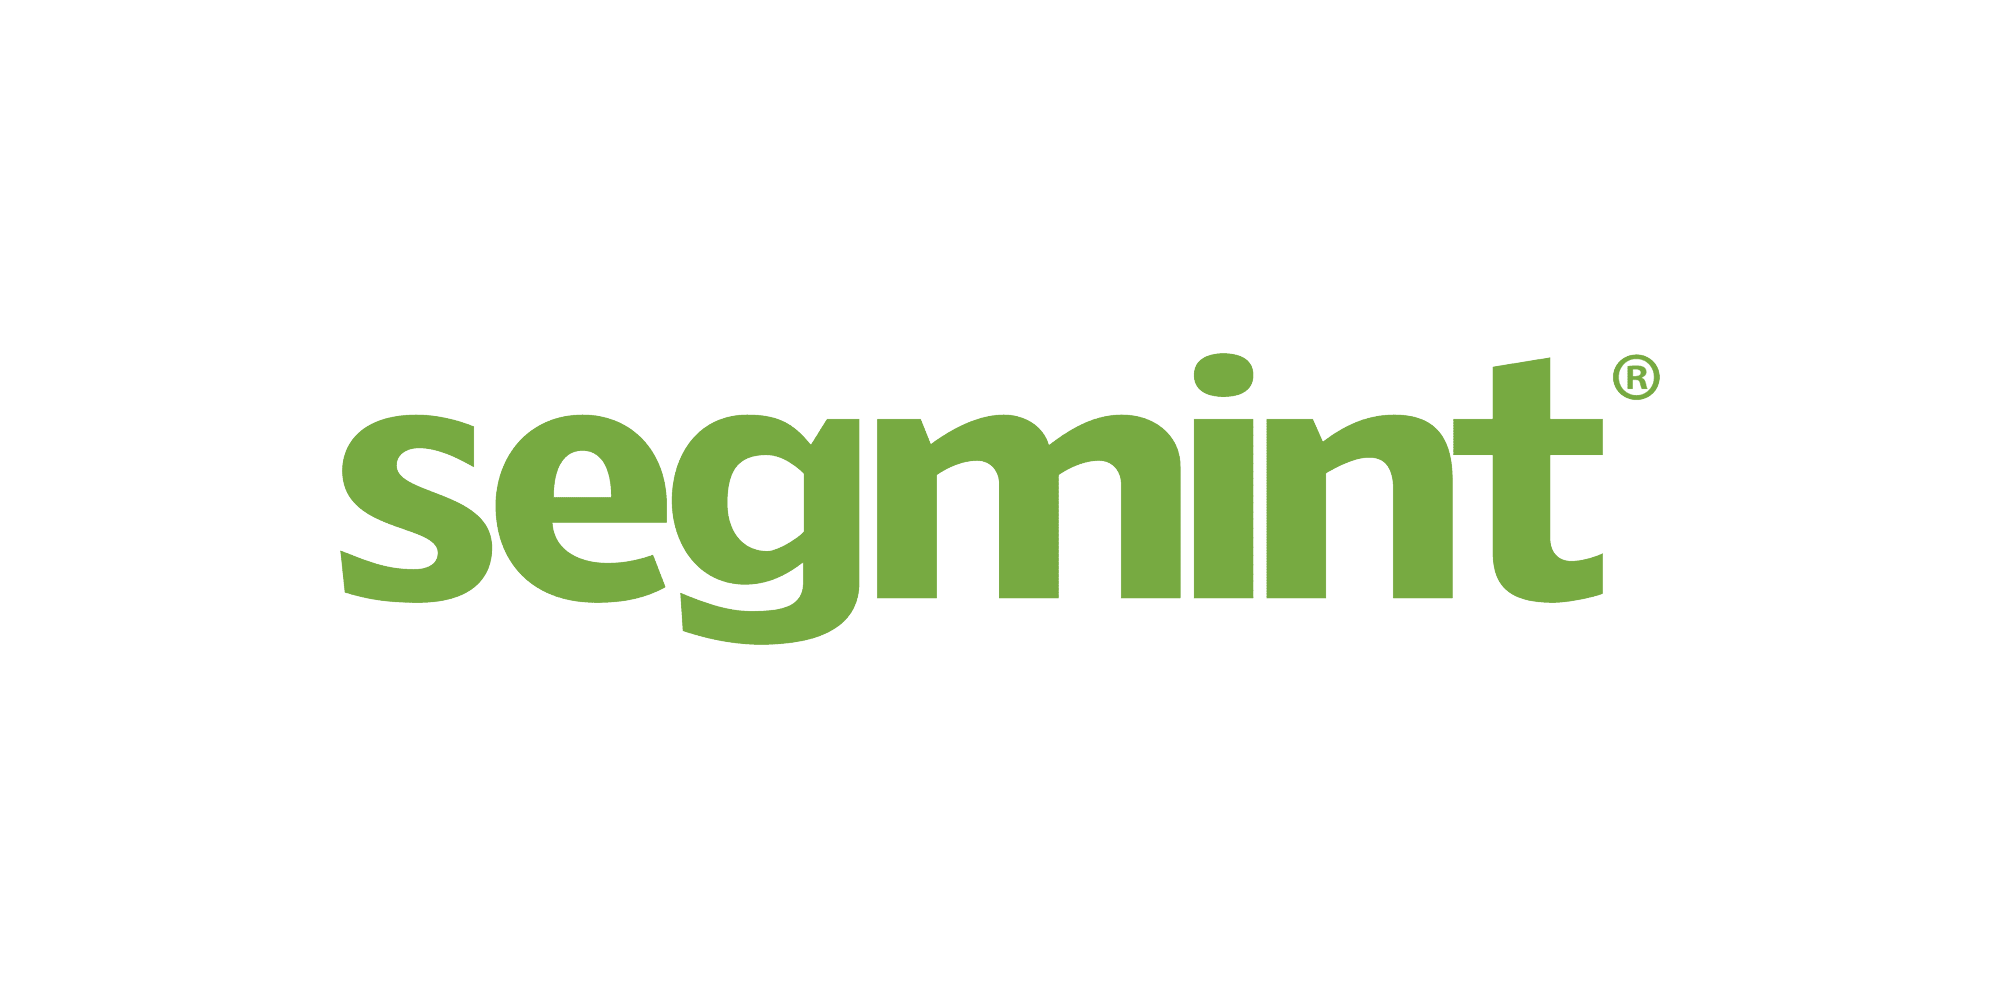 Segmint Issues A Plea To Financial Institutions: Leverage Your Data To Boost Financial Wellness